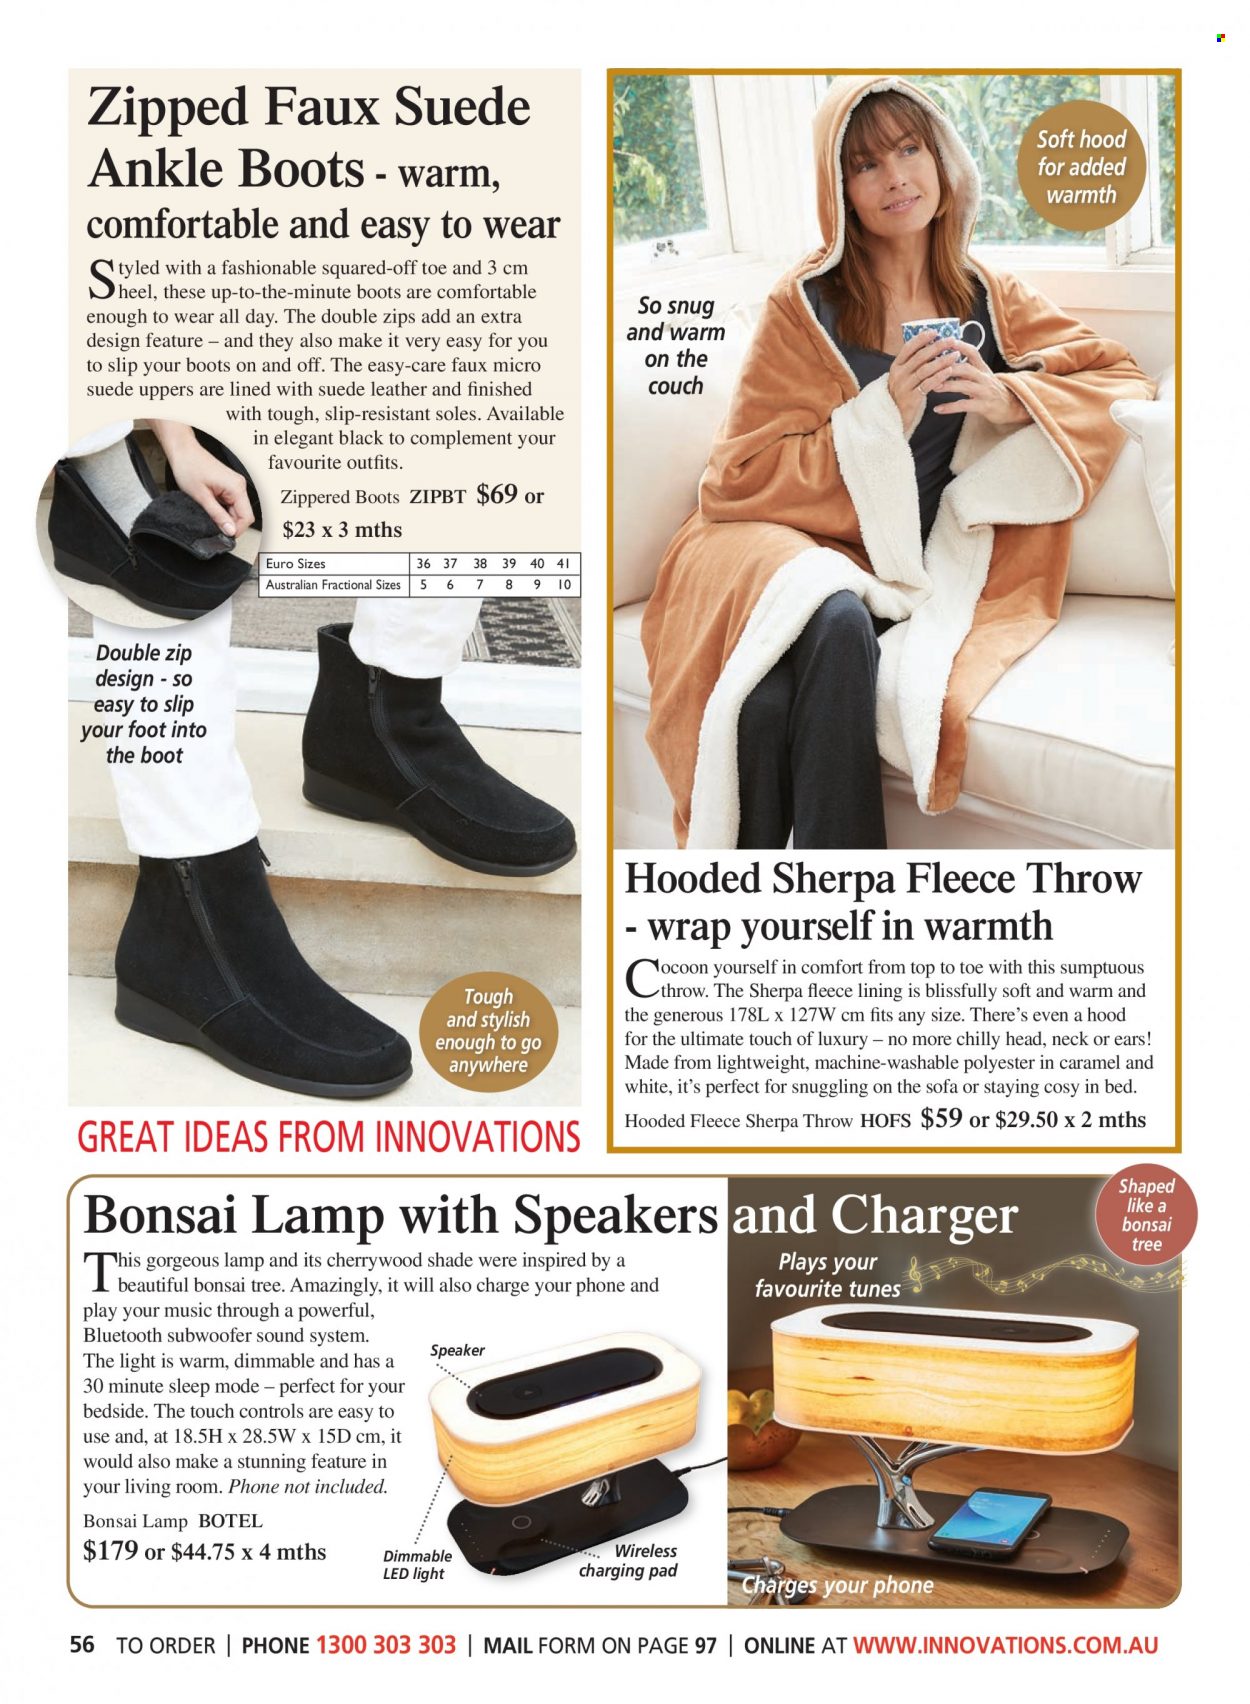 thumbnail - Innovations Catalogue - Sales products - boots, fleece throw, speaker, subwoofer, soundbar system, sherpa, Snug, lamp, LED light. Page 56.